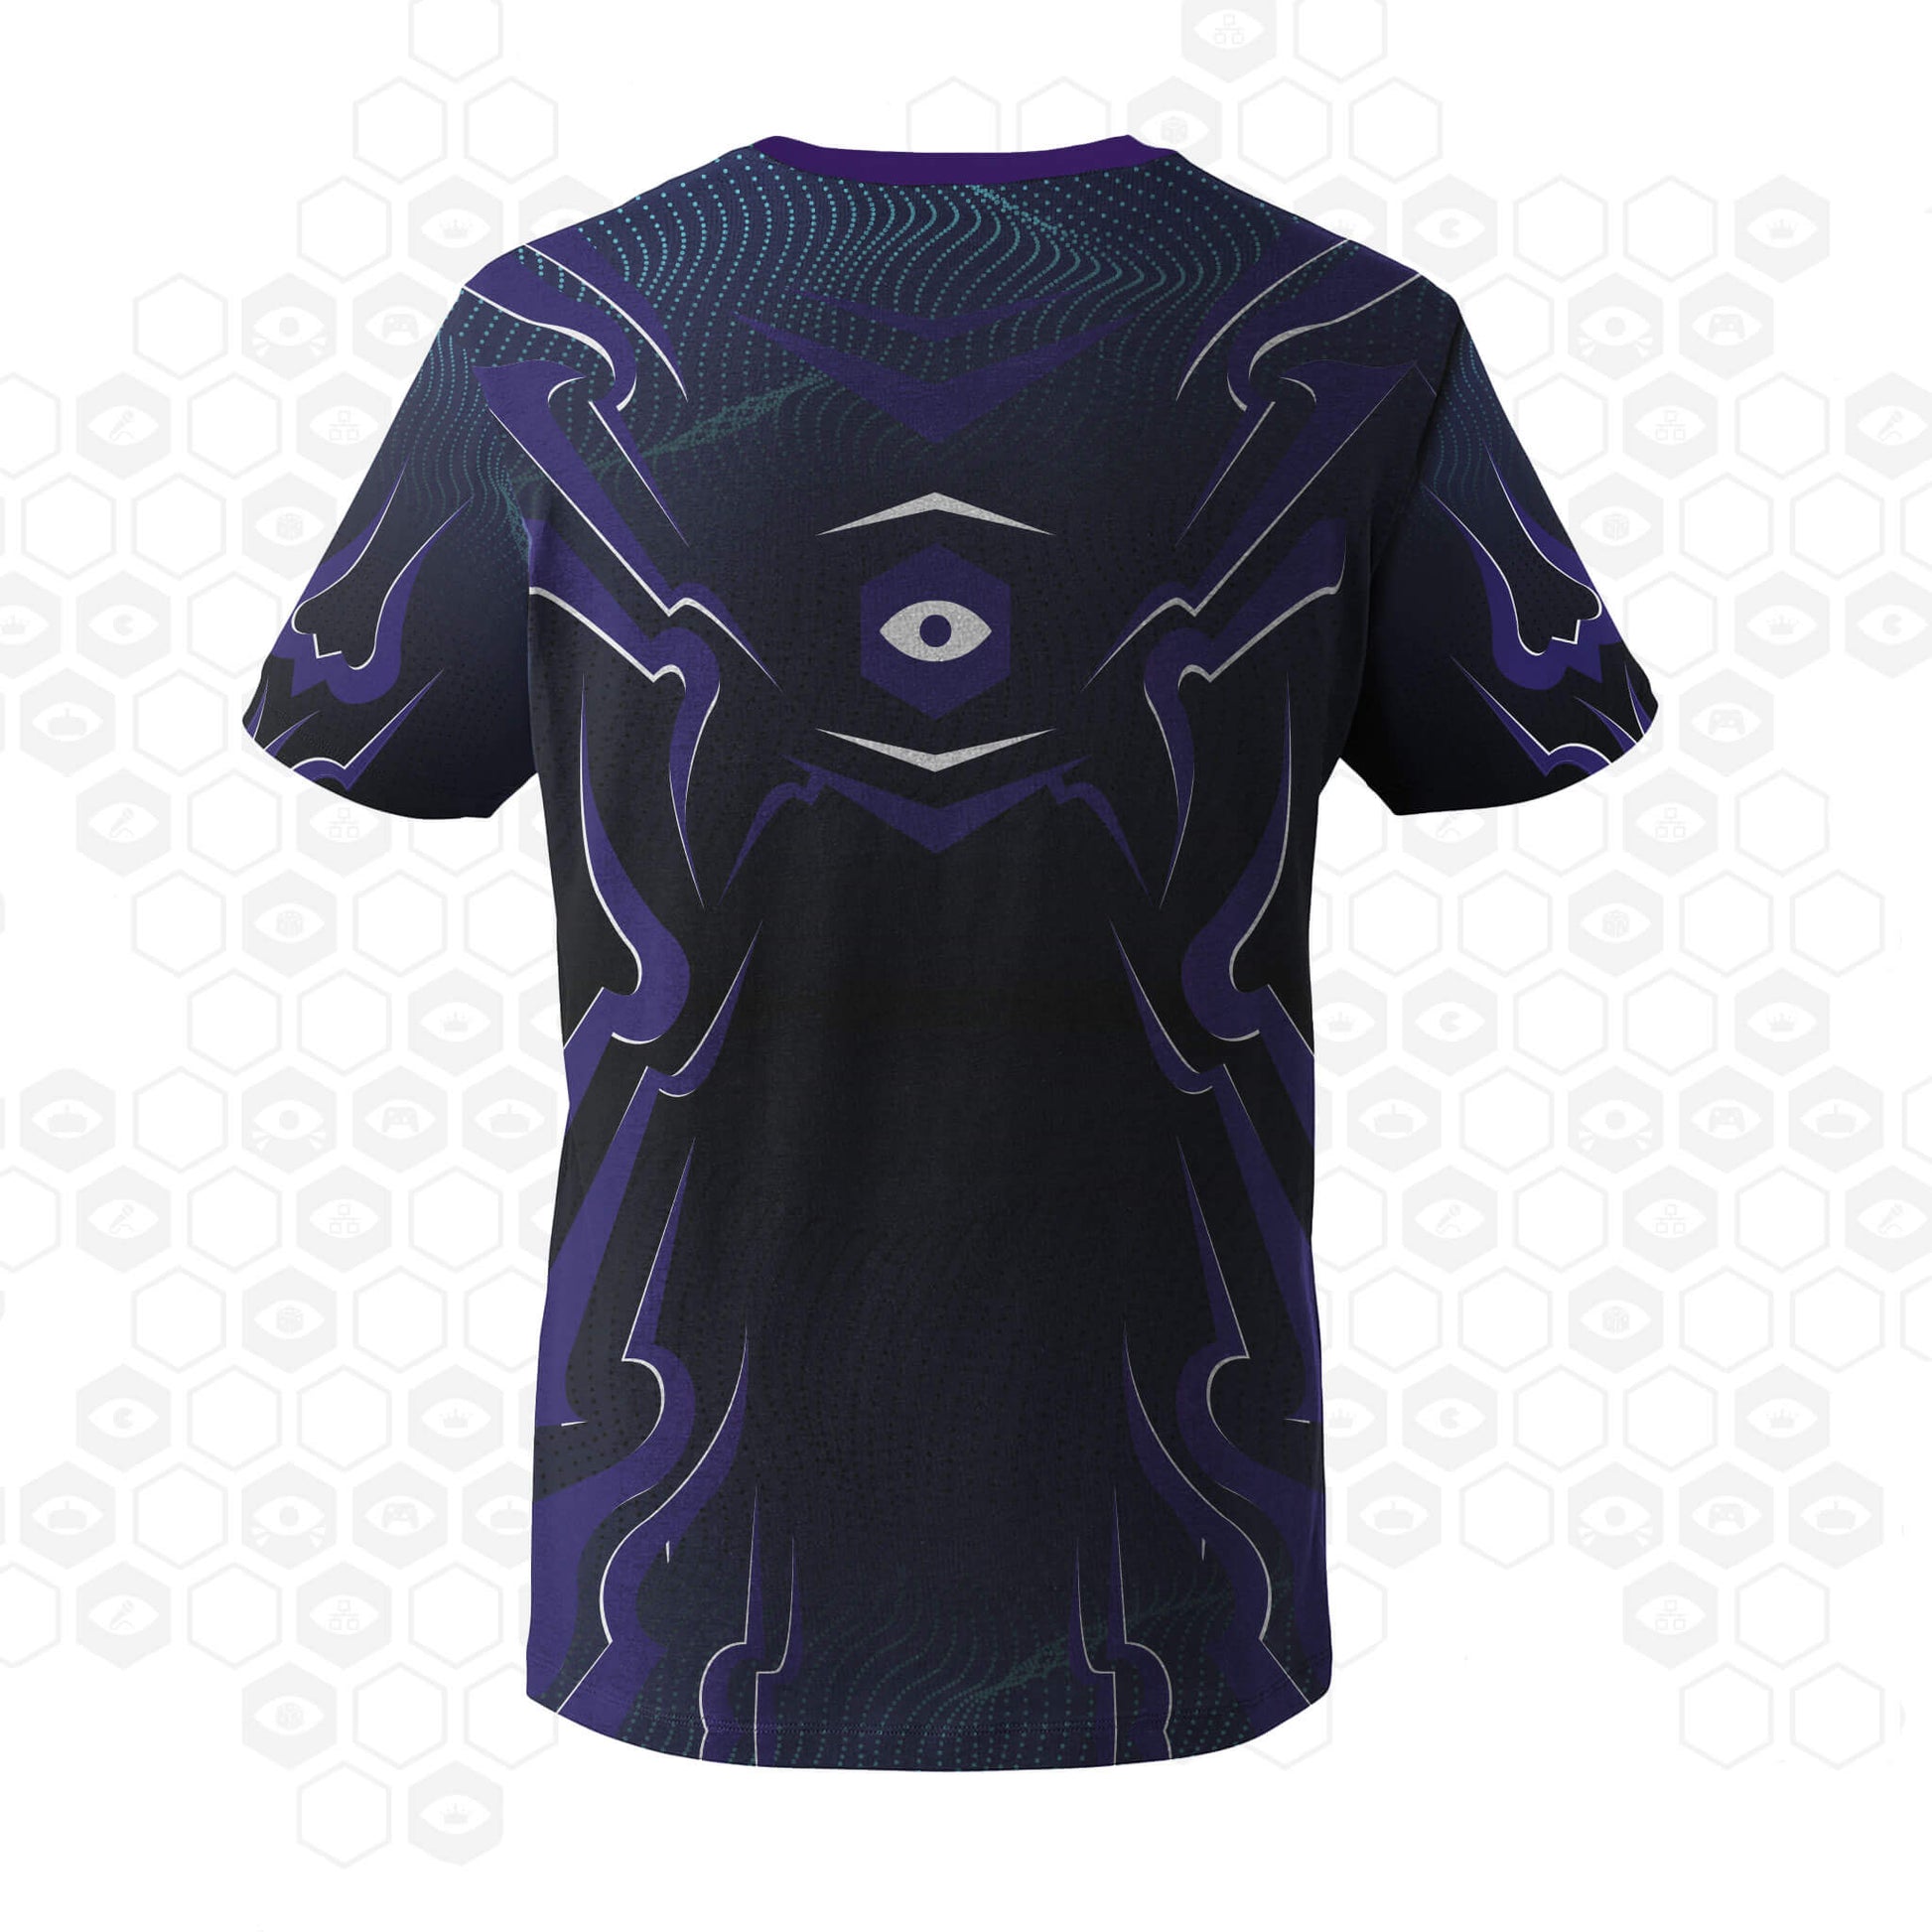 Official i70 Midnight Glyph eSports jersey - Black/Purple - Back | Insomnia Gaming Festival